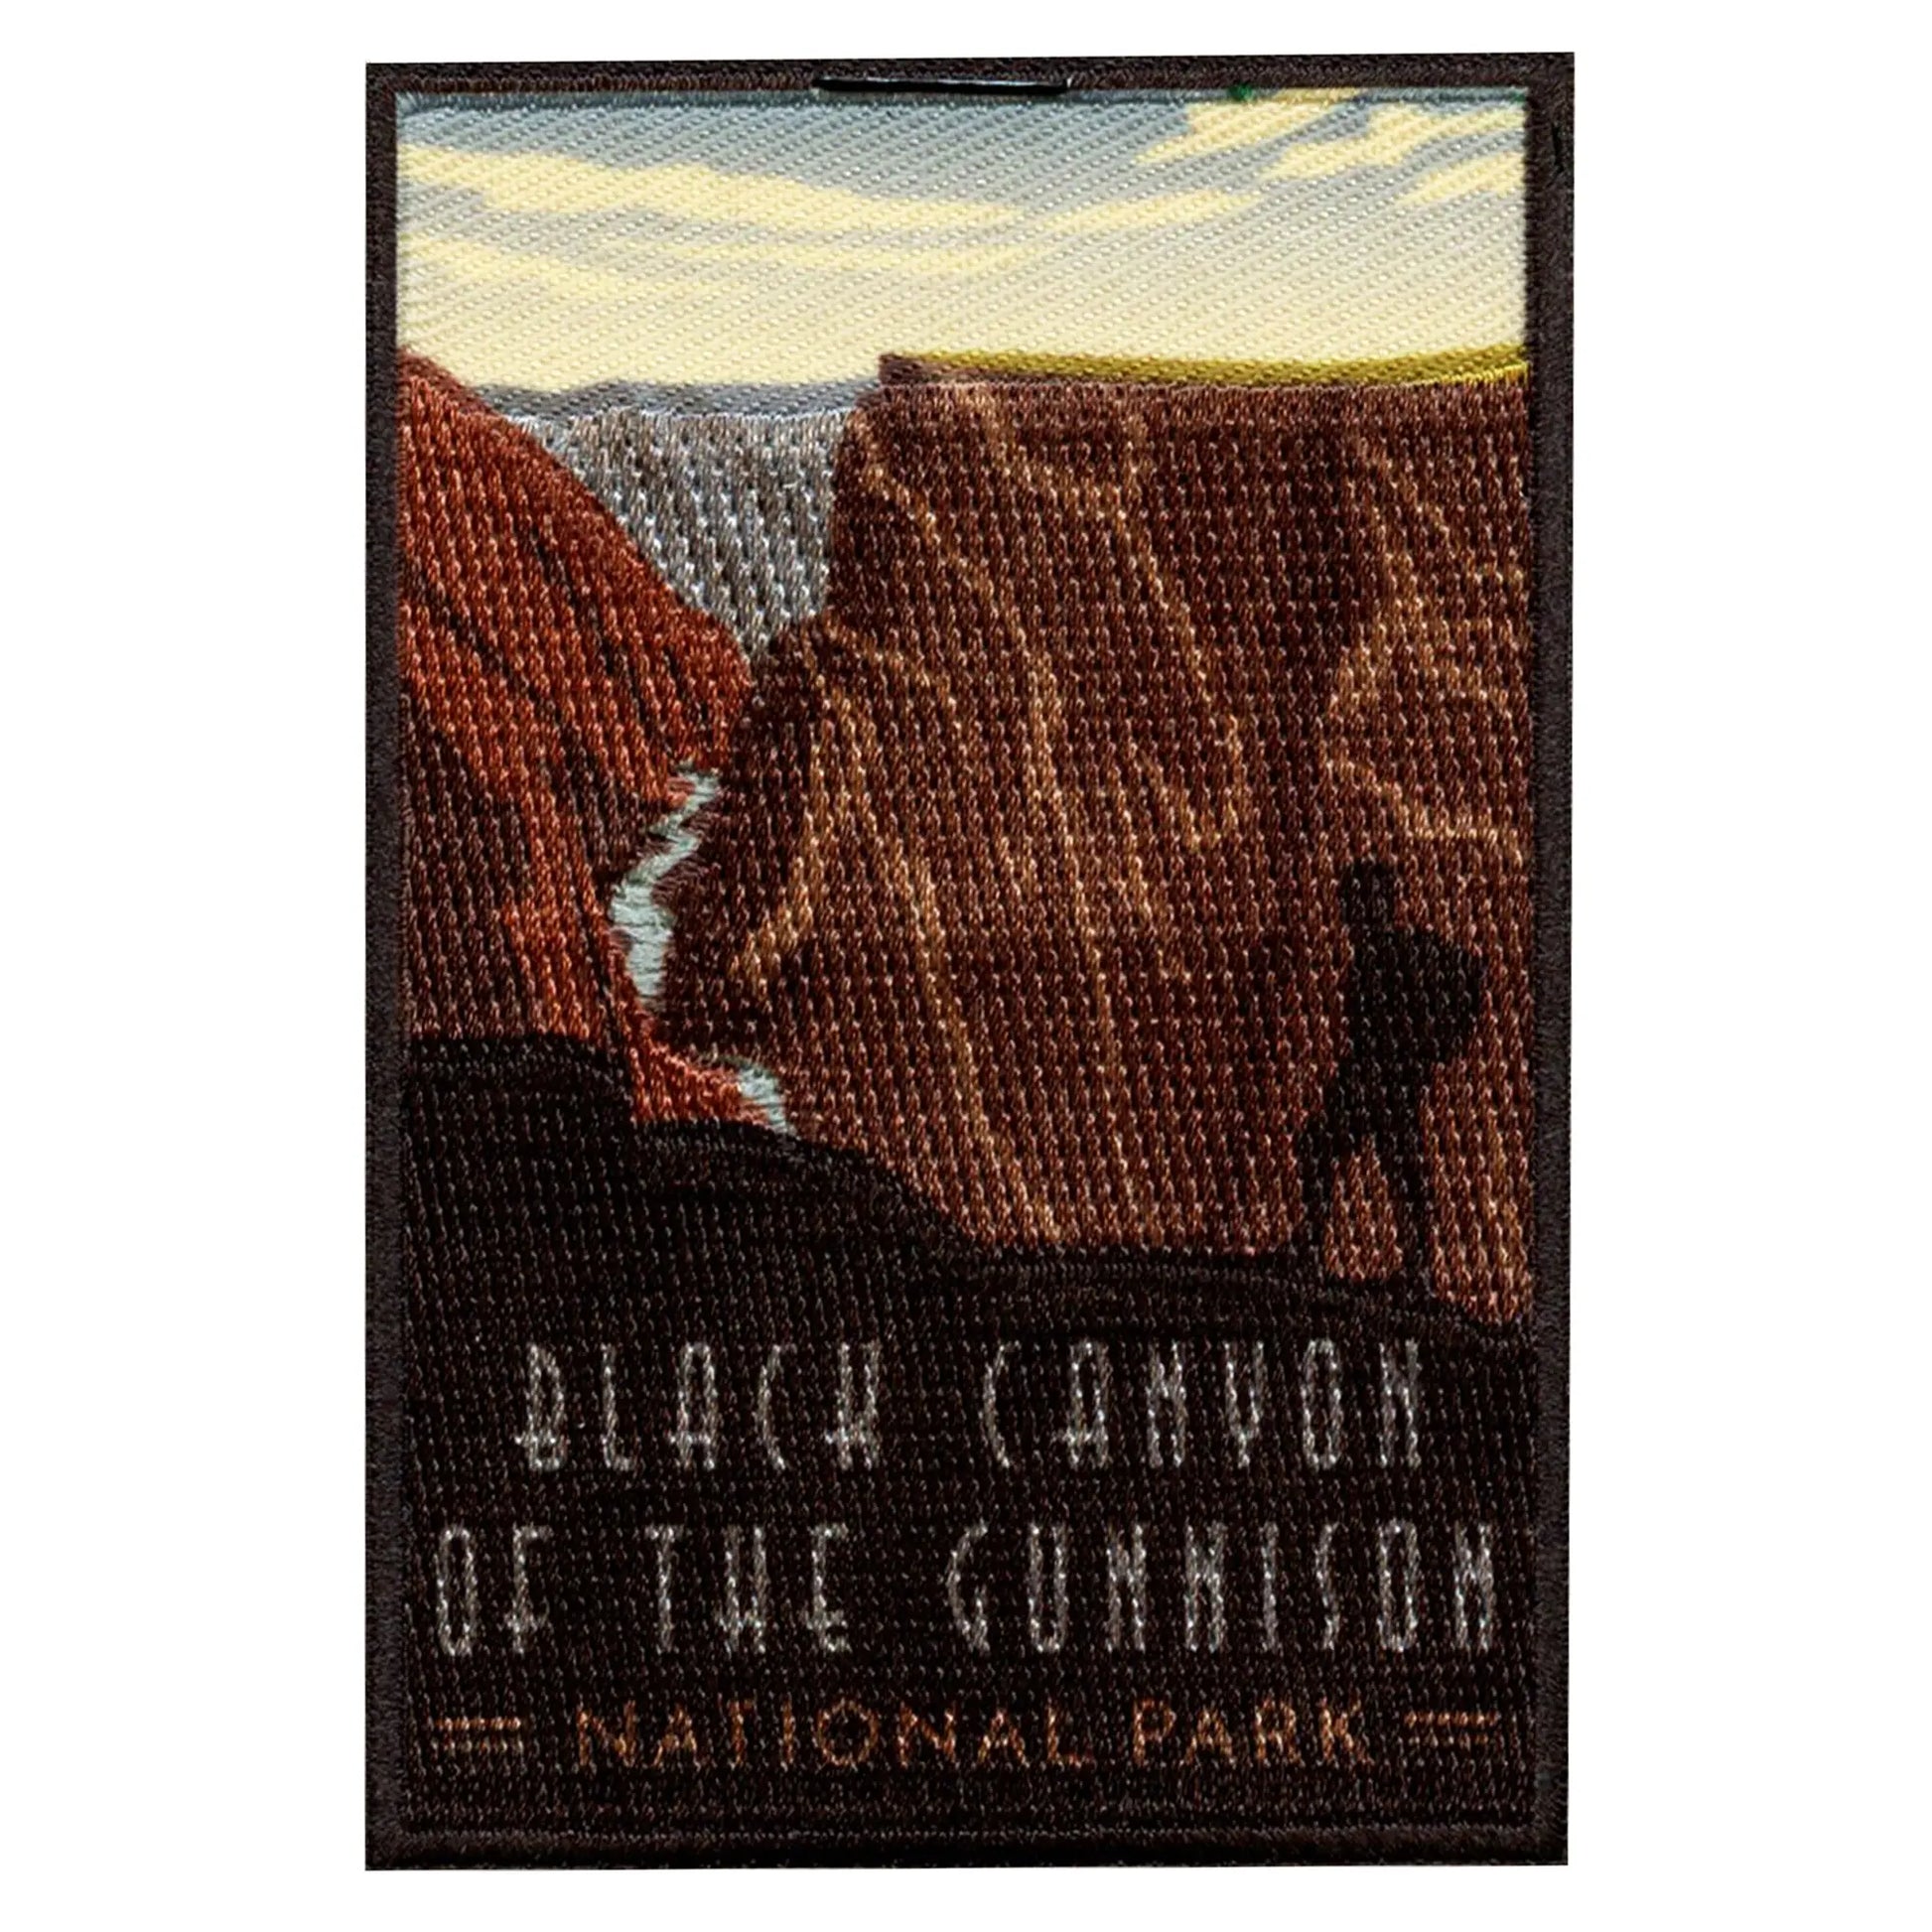 Black Canyon of the Gunnison Patch National Park Travel Sublimated Embroidery Iron On